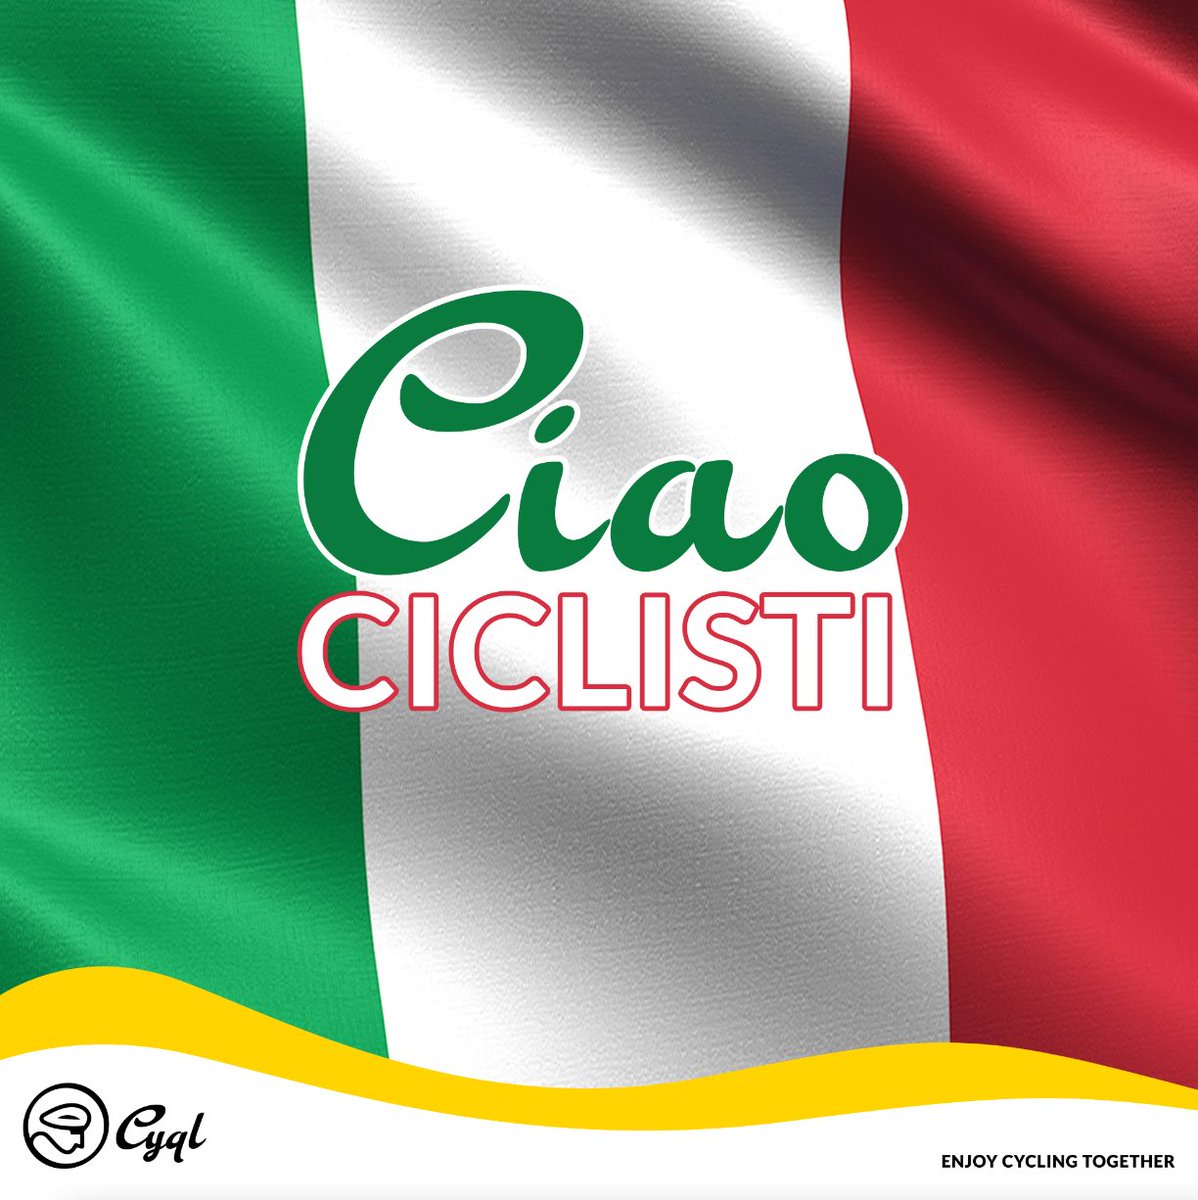 🎉 ℂ𝕚𝕒𝕠! From today, Cyql is available in Italy! 

📱Download the Cyql app and invite all your friends in your own private or public cycling group.

𝐄𝐧𝐣𝐨𝐲 𝐂𝐲𝐜𝐥𝐢𝐧𝐠 𝐓𝐨𝐠𝐞𝐭𝐡𝐞𝐫

#cyclinglife #cyclinglifestyle #cyclingapp #outdoorlife #enjoycycling